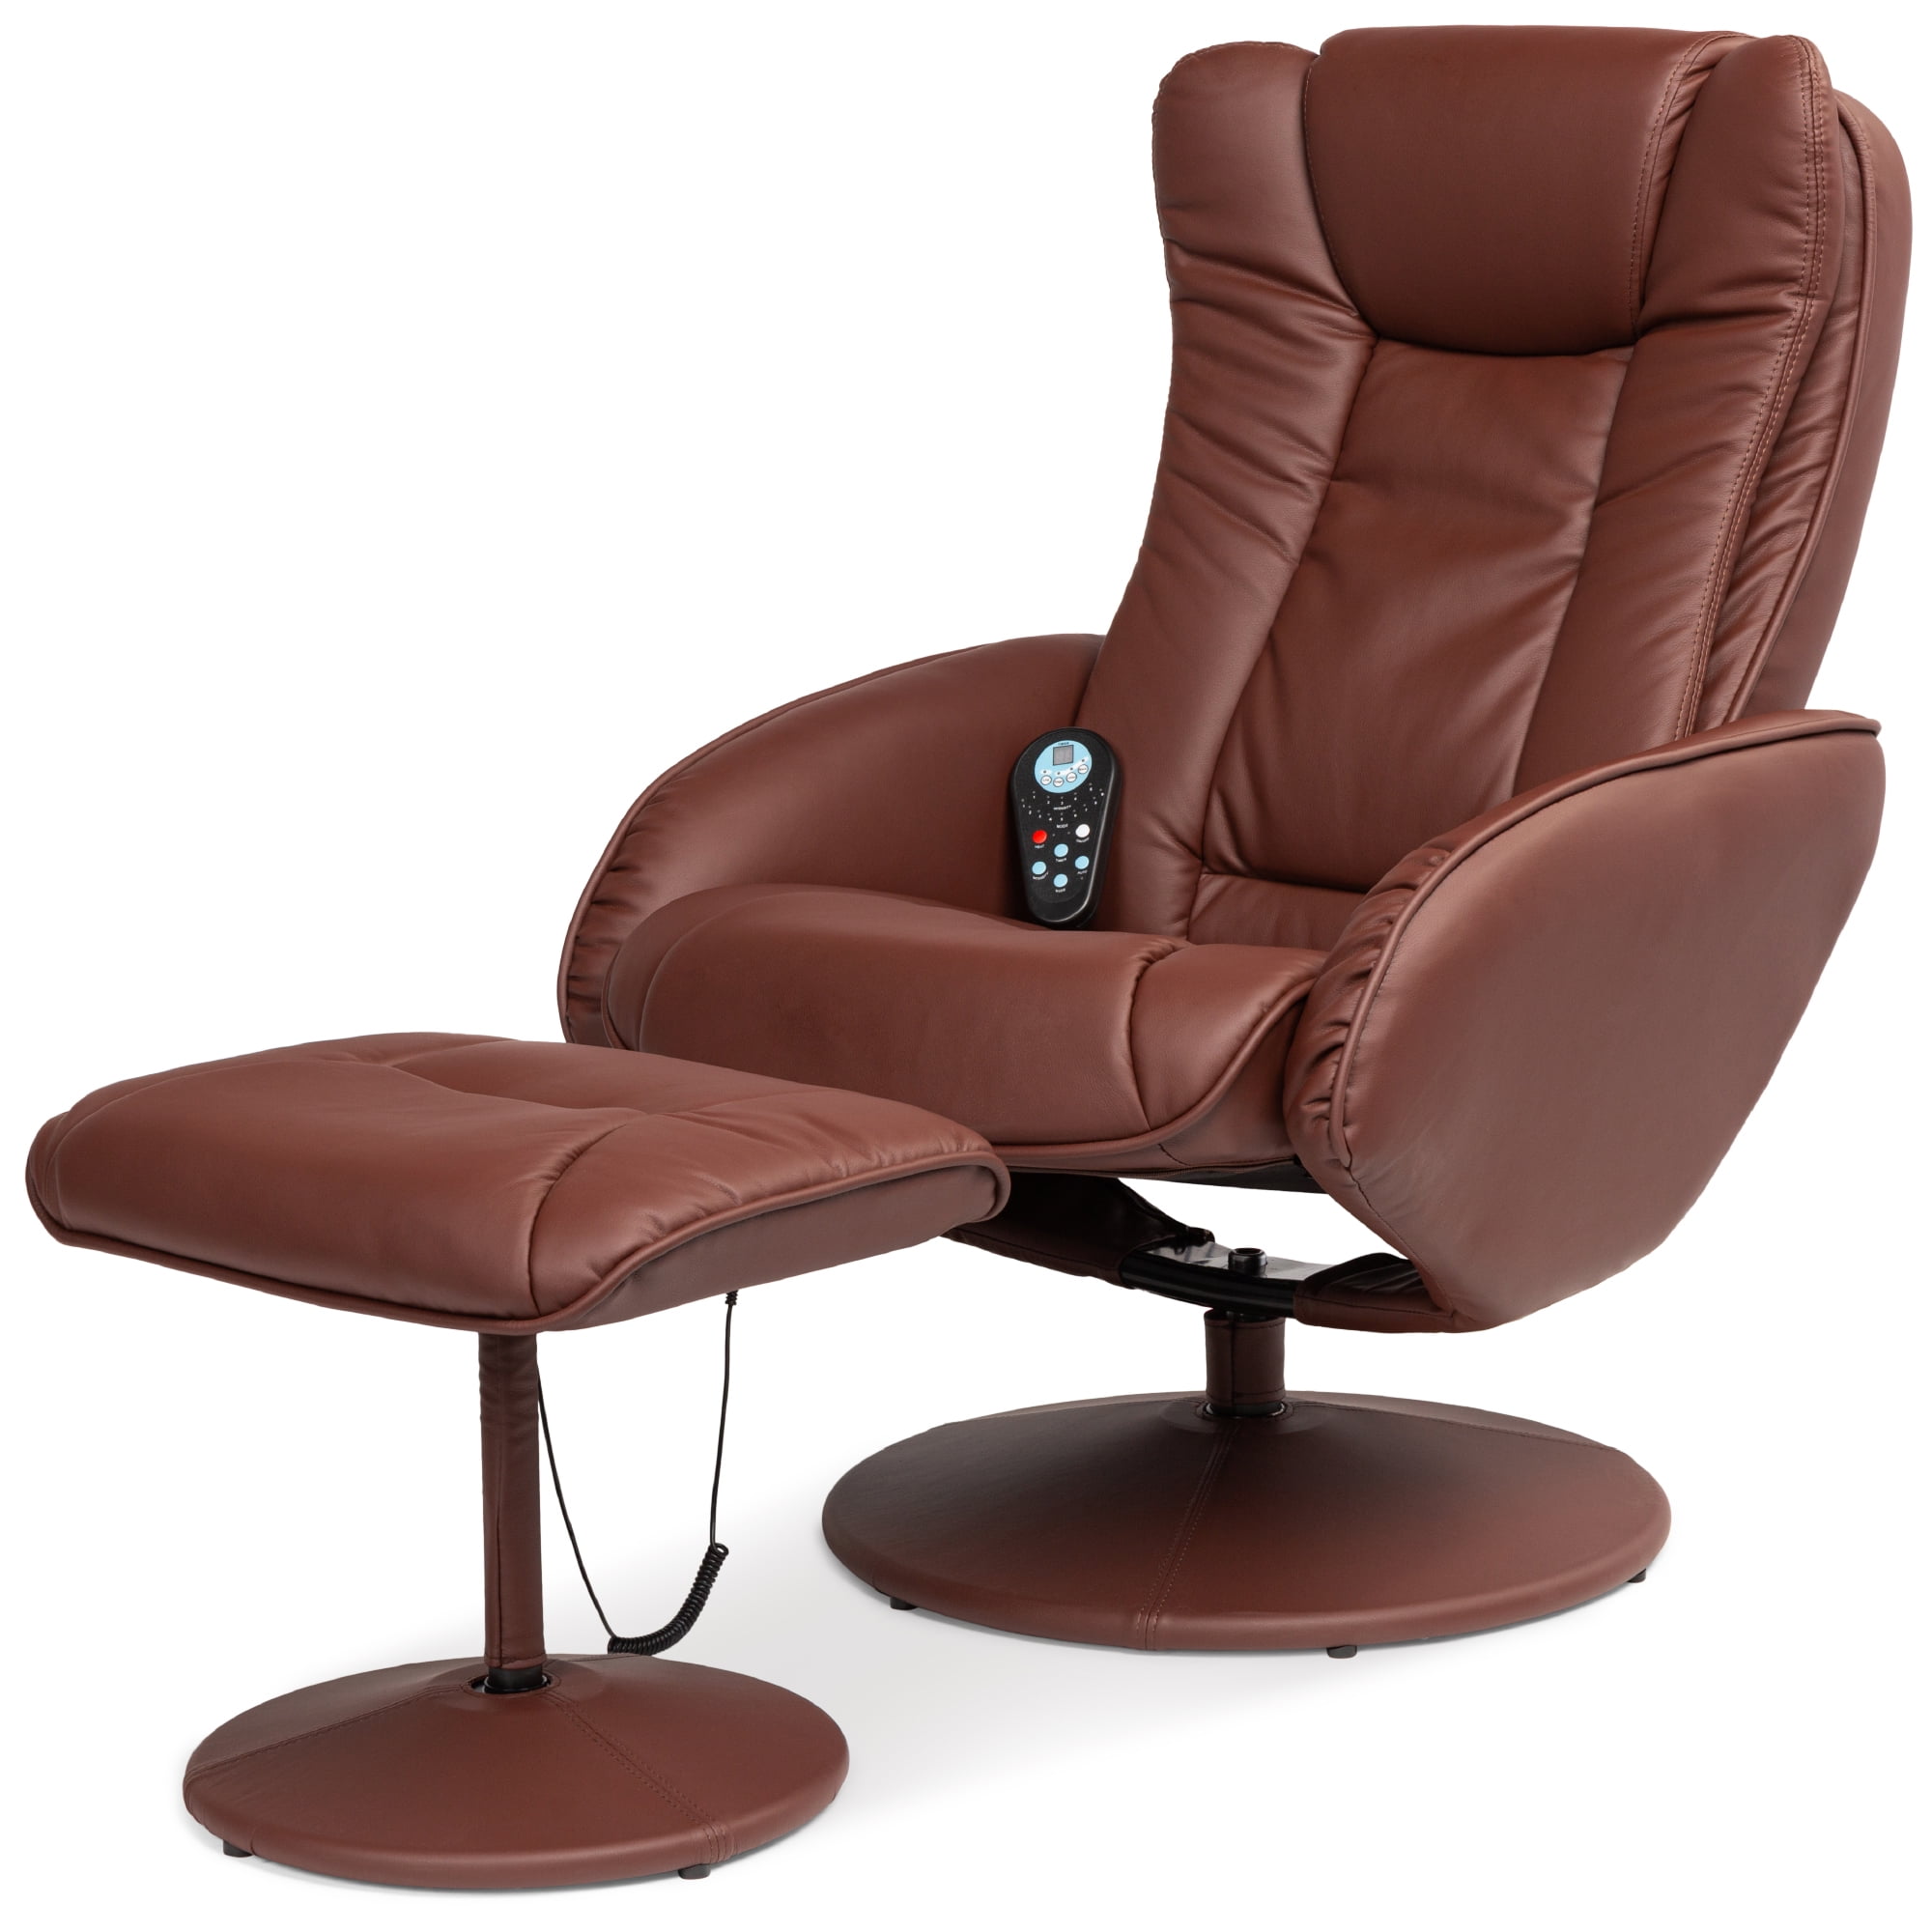 Brown Electric Massage Leather Chair Home Office Gaming Chair Swivel Recliner 